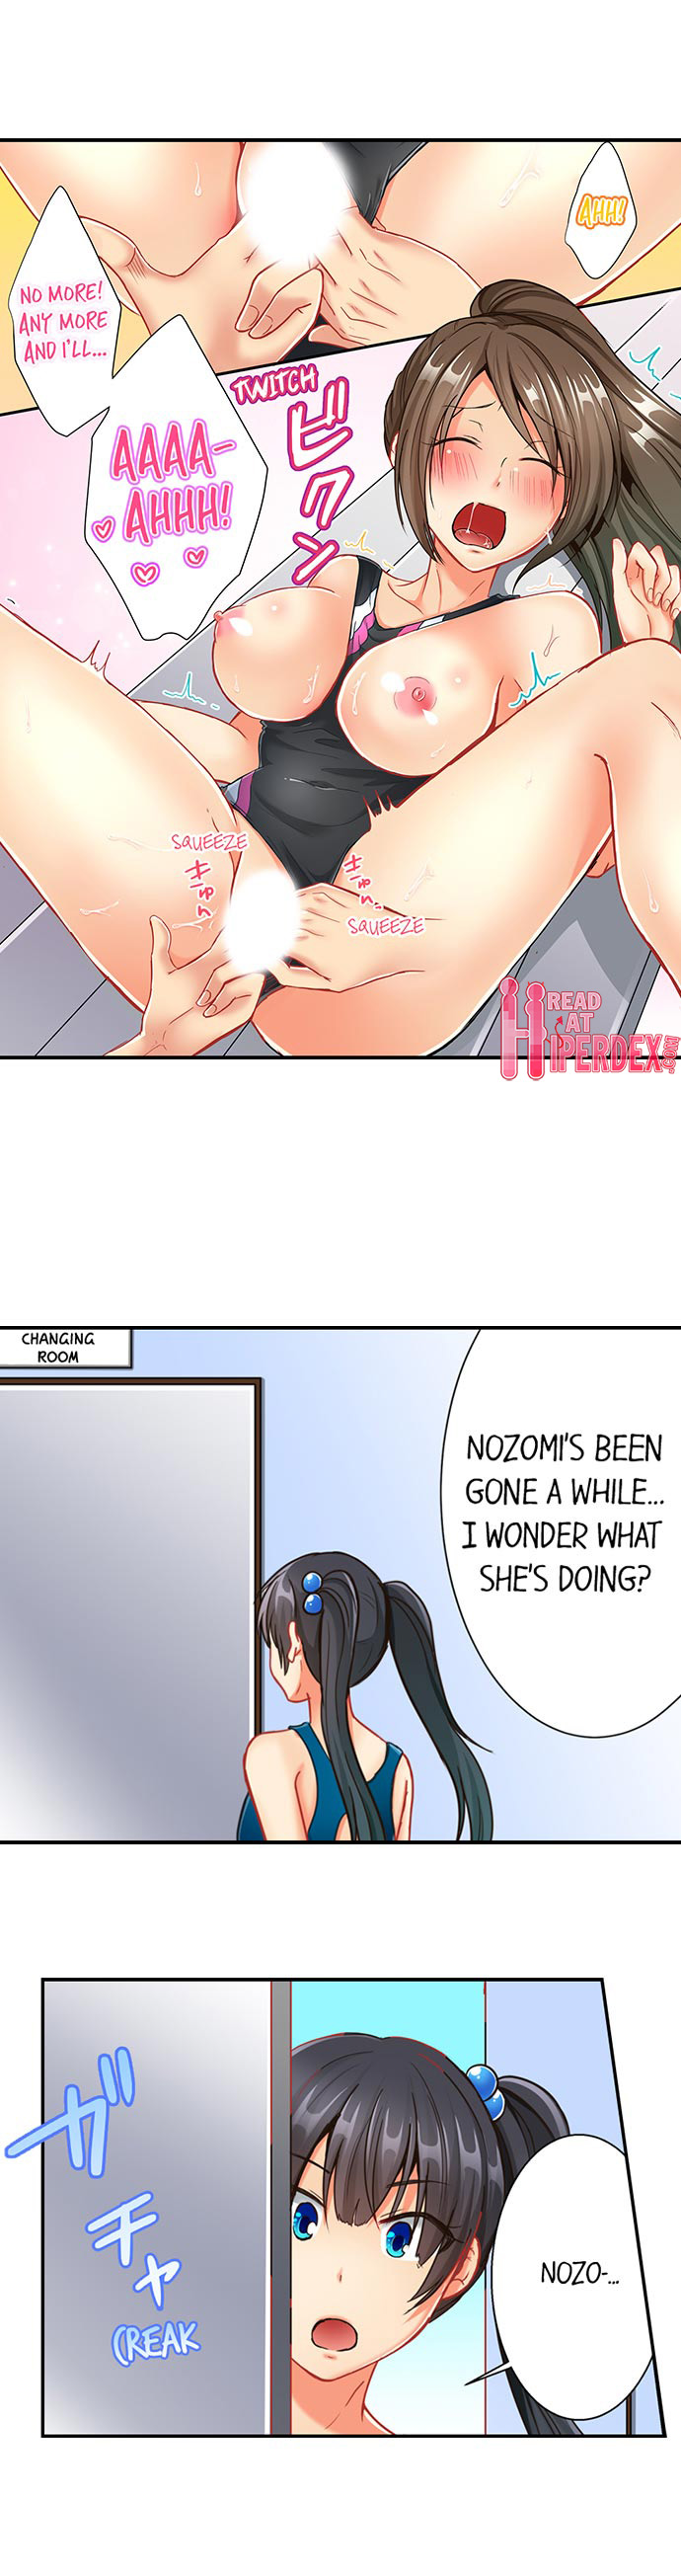 80% of the Swimming Club Girls Are Shaved - Chapter 4 Page 6